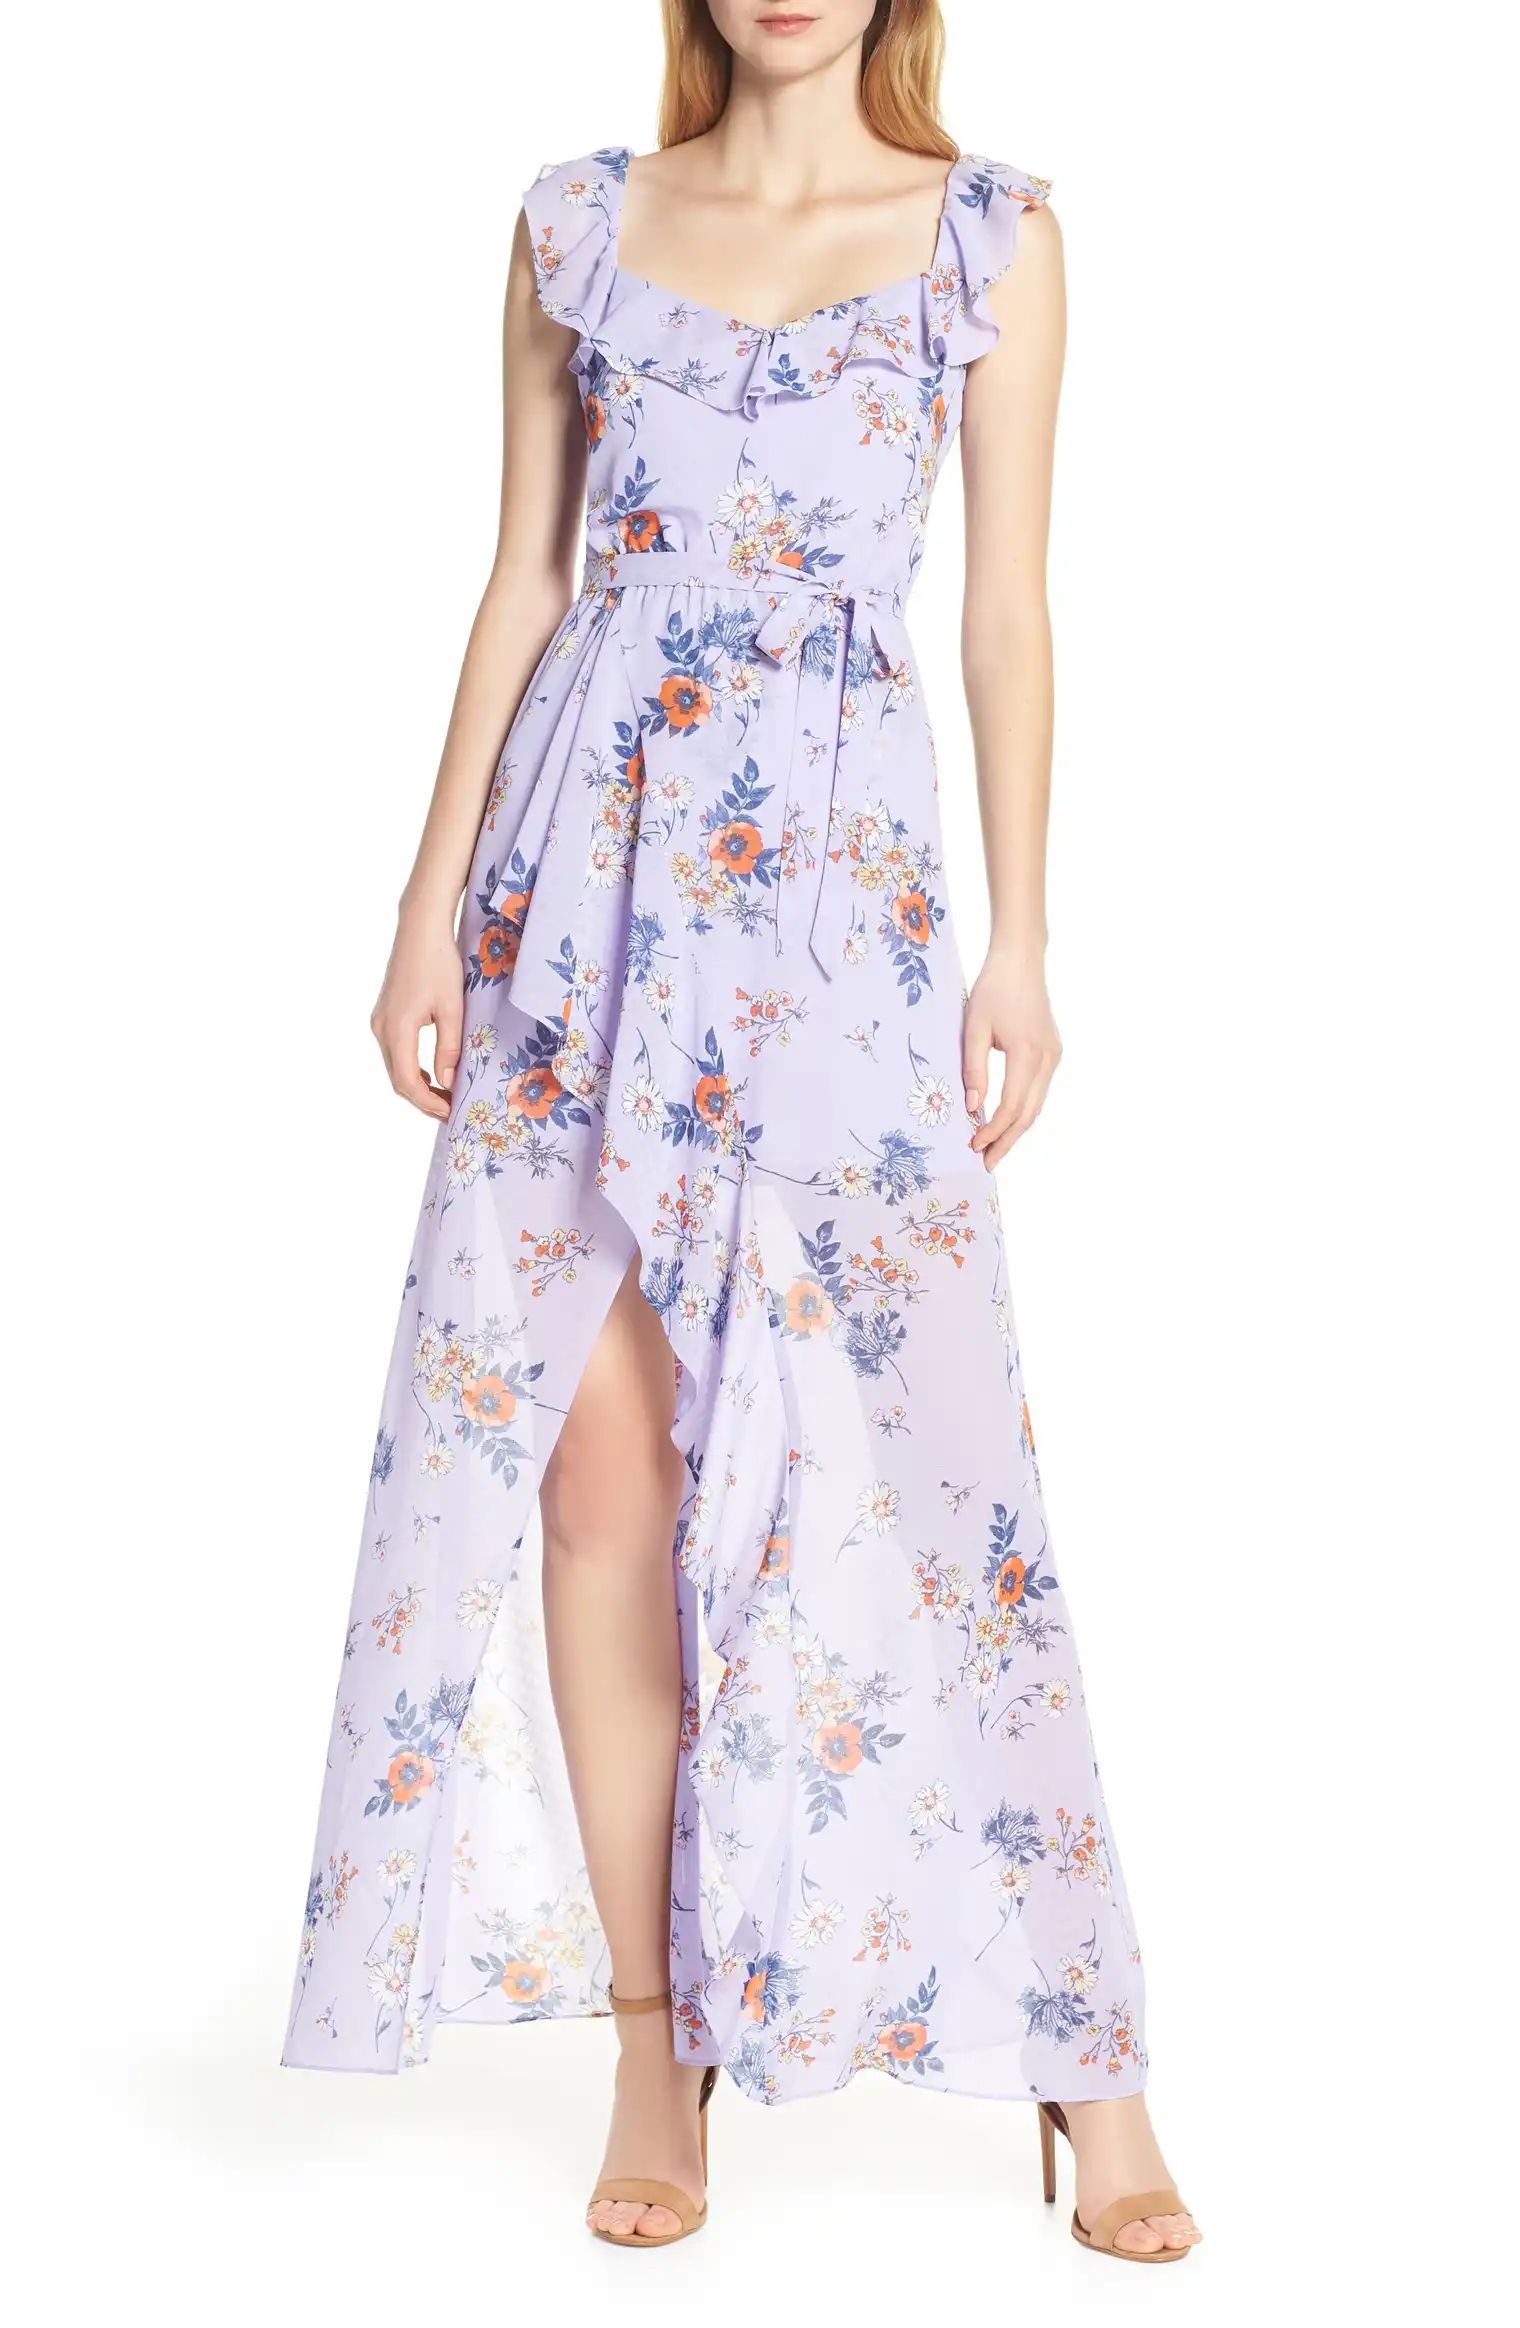 Sure Thing Maxi Dress | Nordstrom